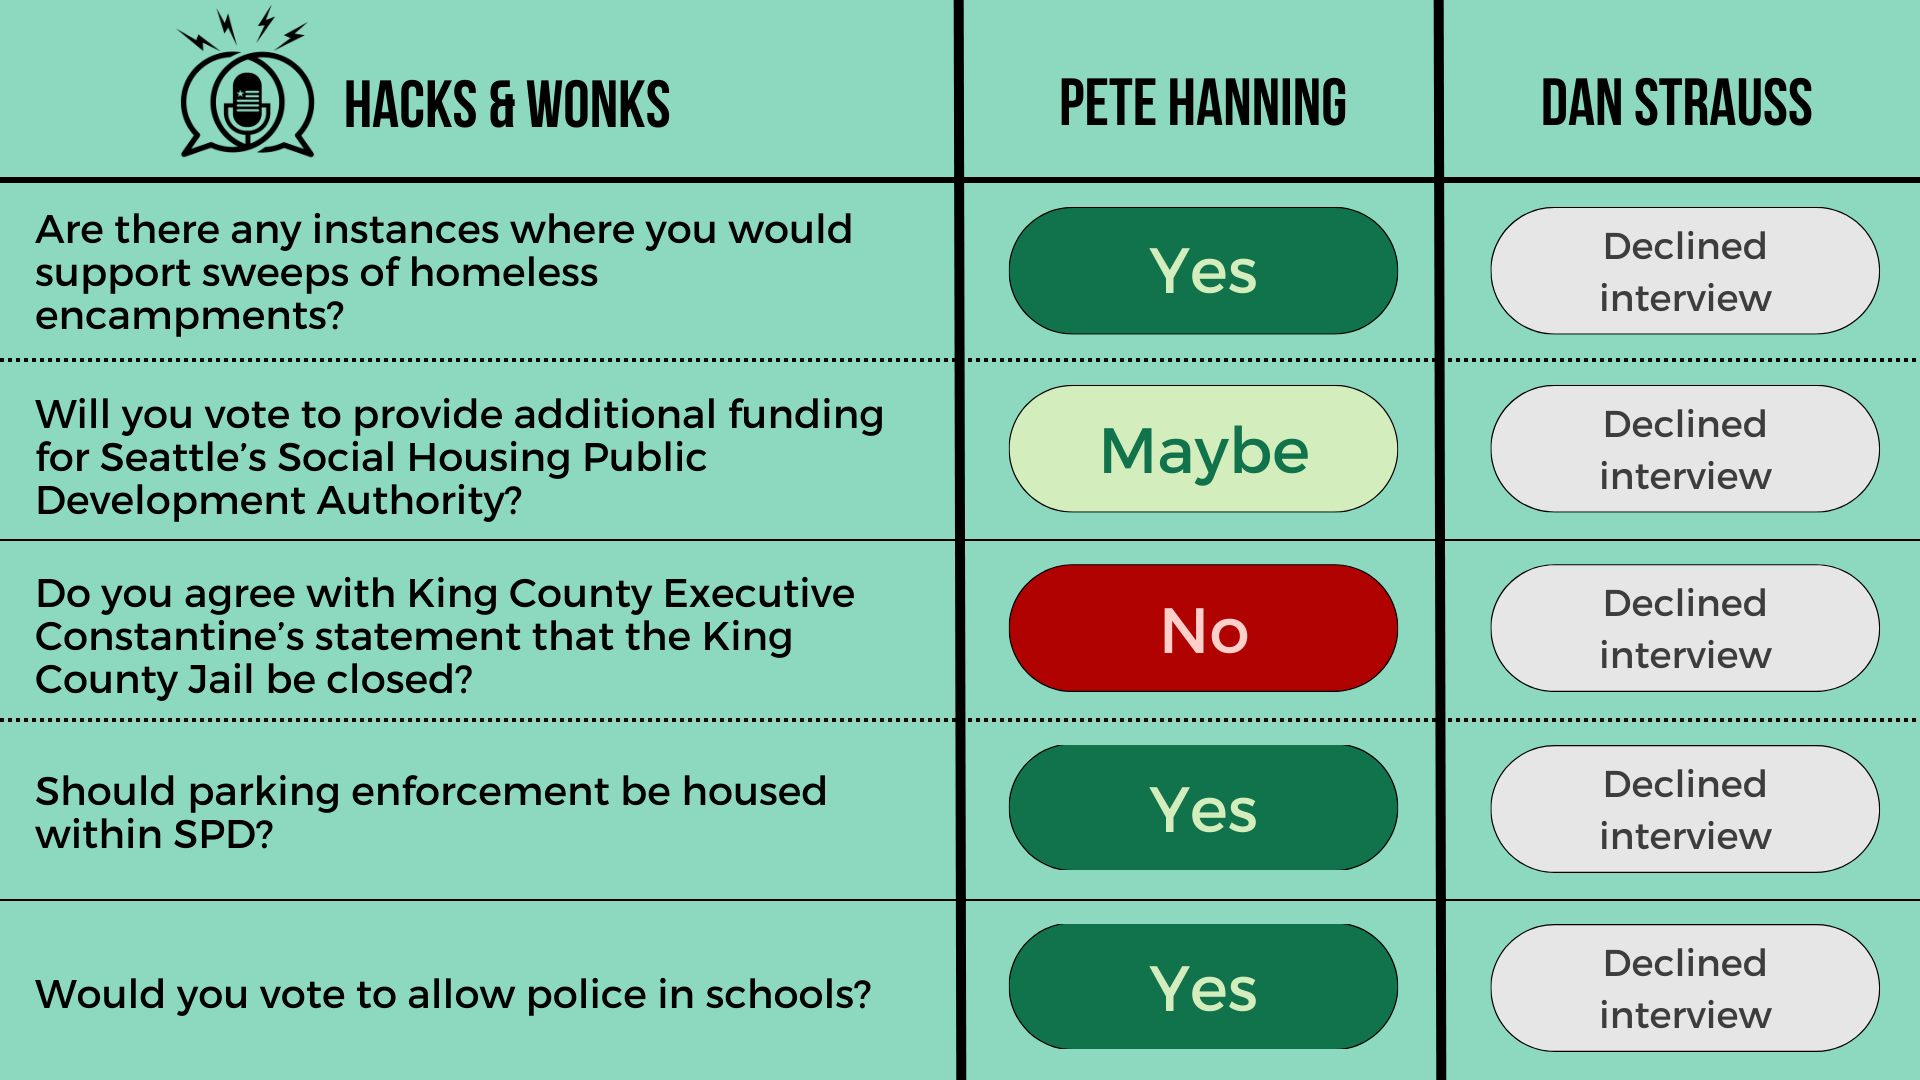 Q: Are there any instances where you would support sweeps of homeless encampments? Pete Hanning: Yes, Dan Strauss: Declined interview  Q: Will you vote to provide additional funding for Seattle’s Social Housing Public Development Authority? Pete Hann